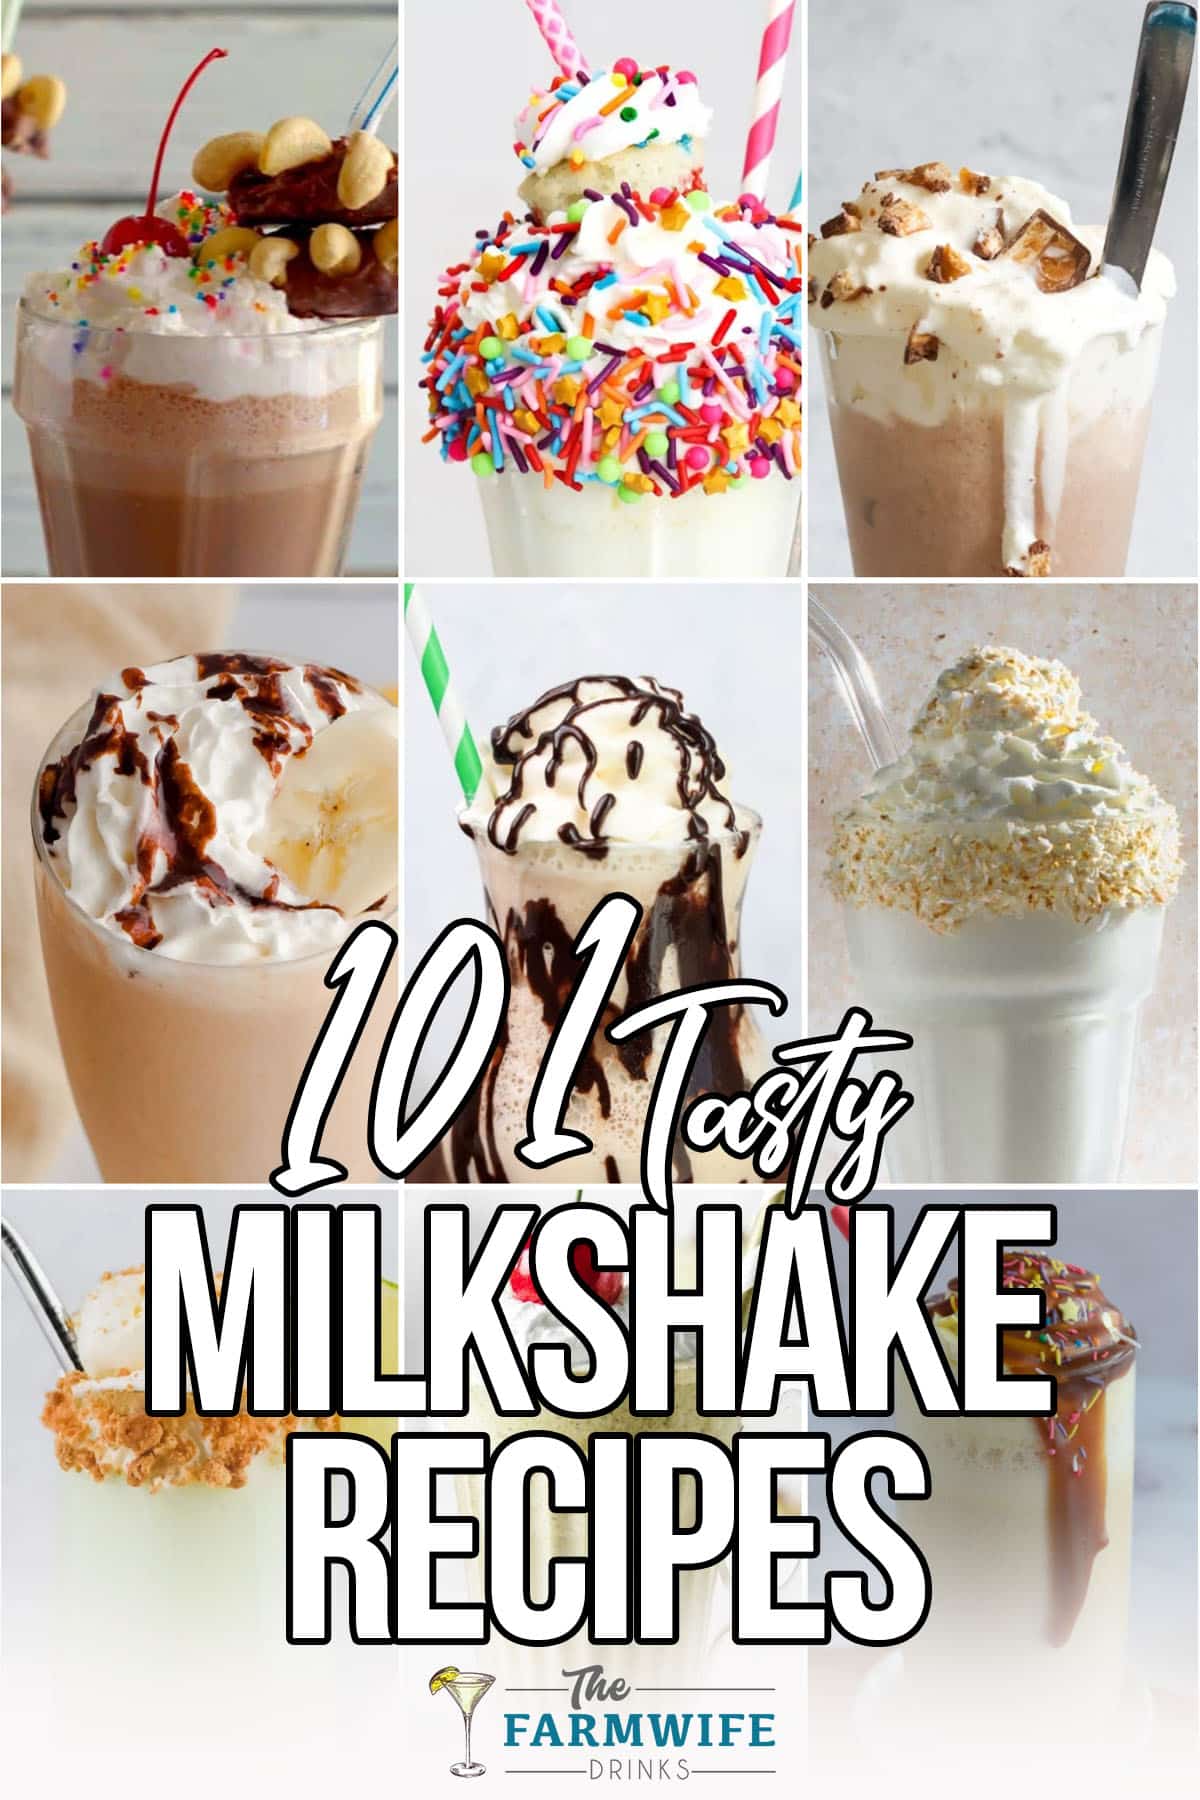 photo collage of delicious milkshake recipes with text which reads 101 tasty milkshake recipes